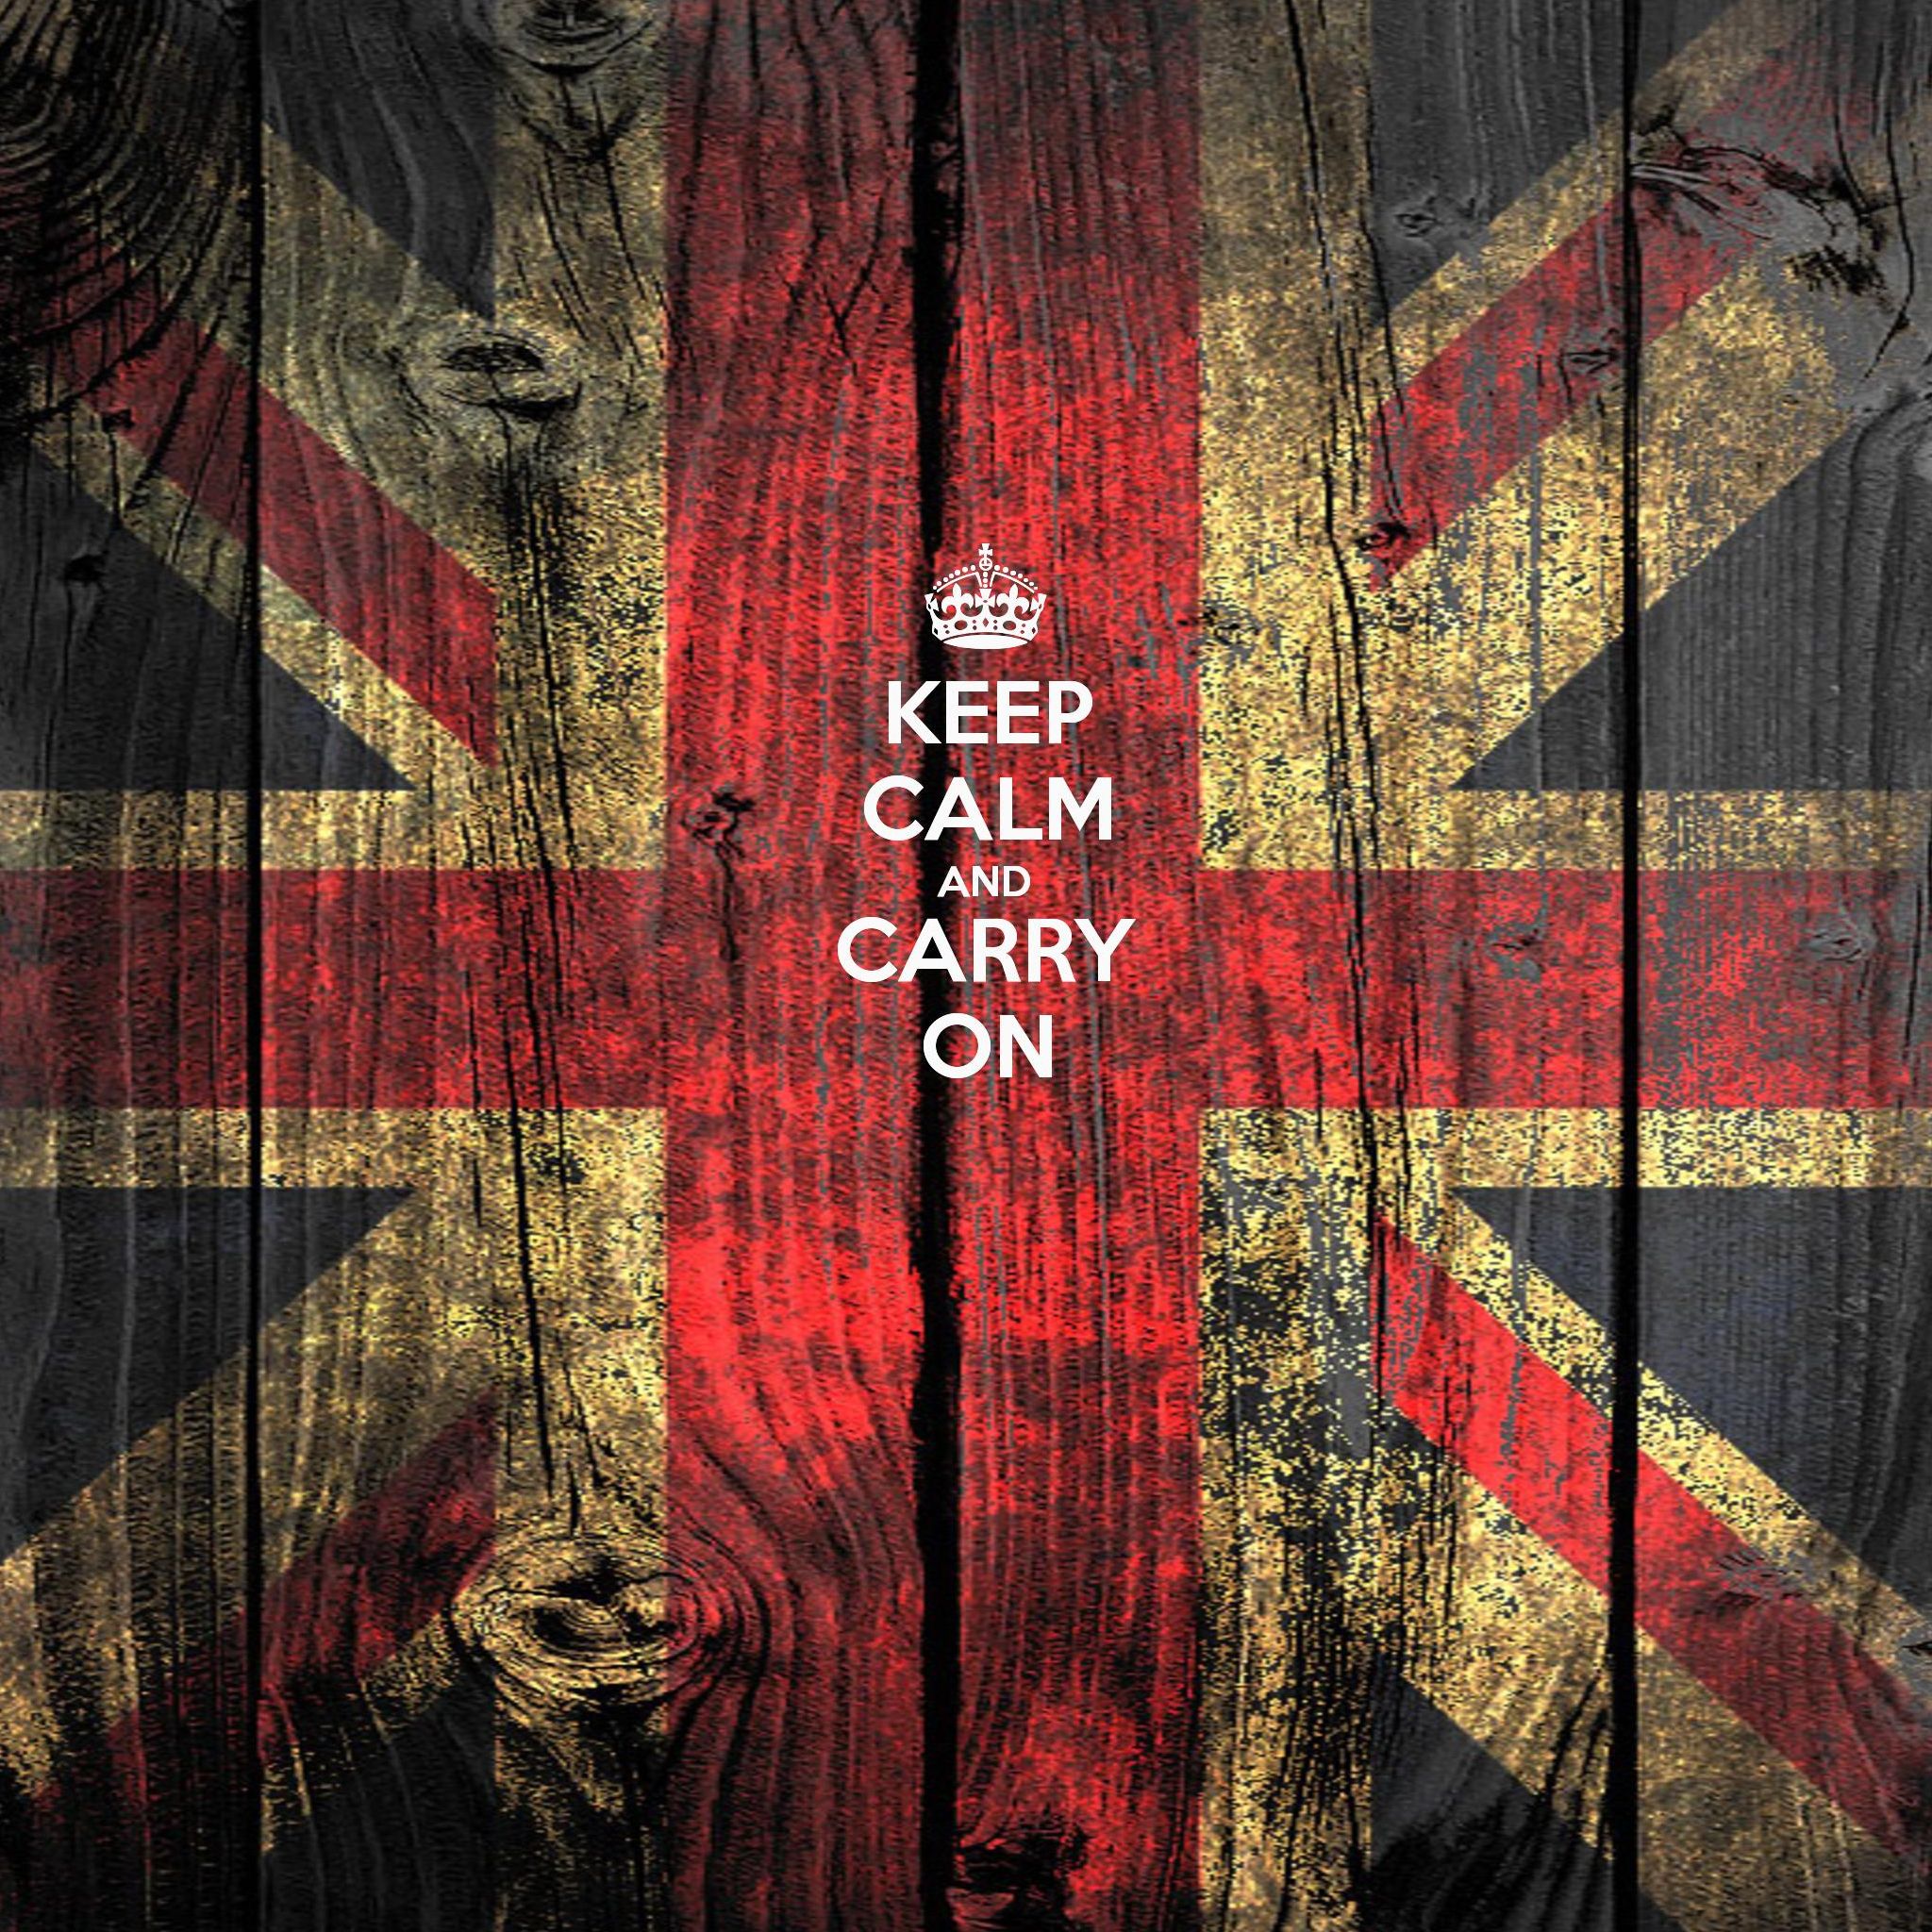 Keep Calm And Carry On Quotes iPad Air Wallpaper Free Download